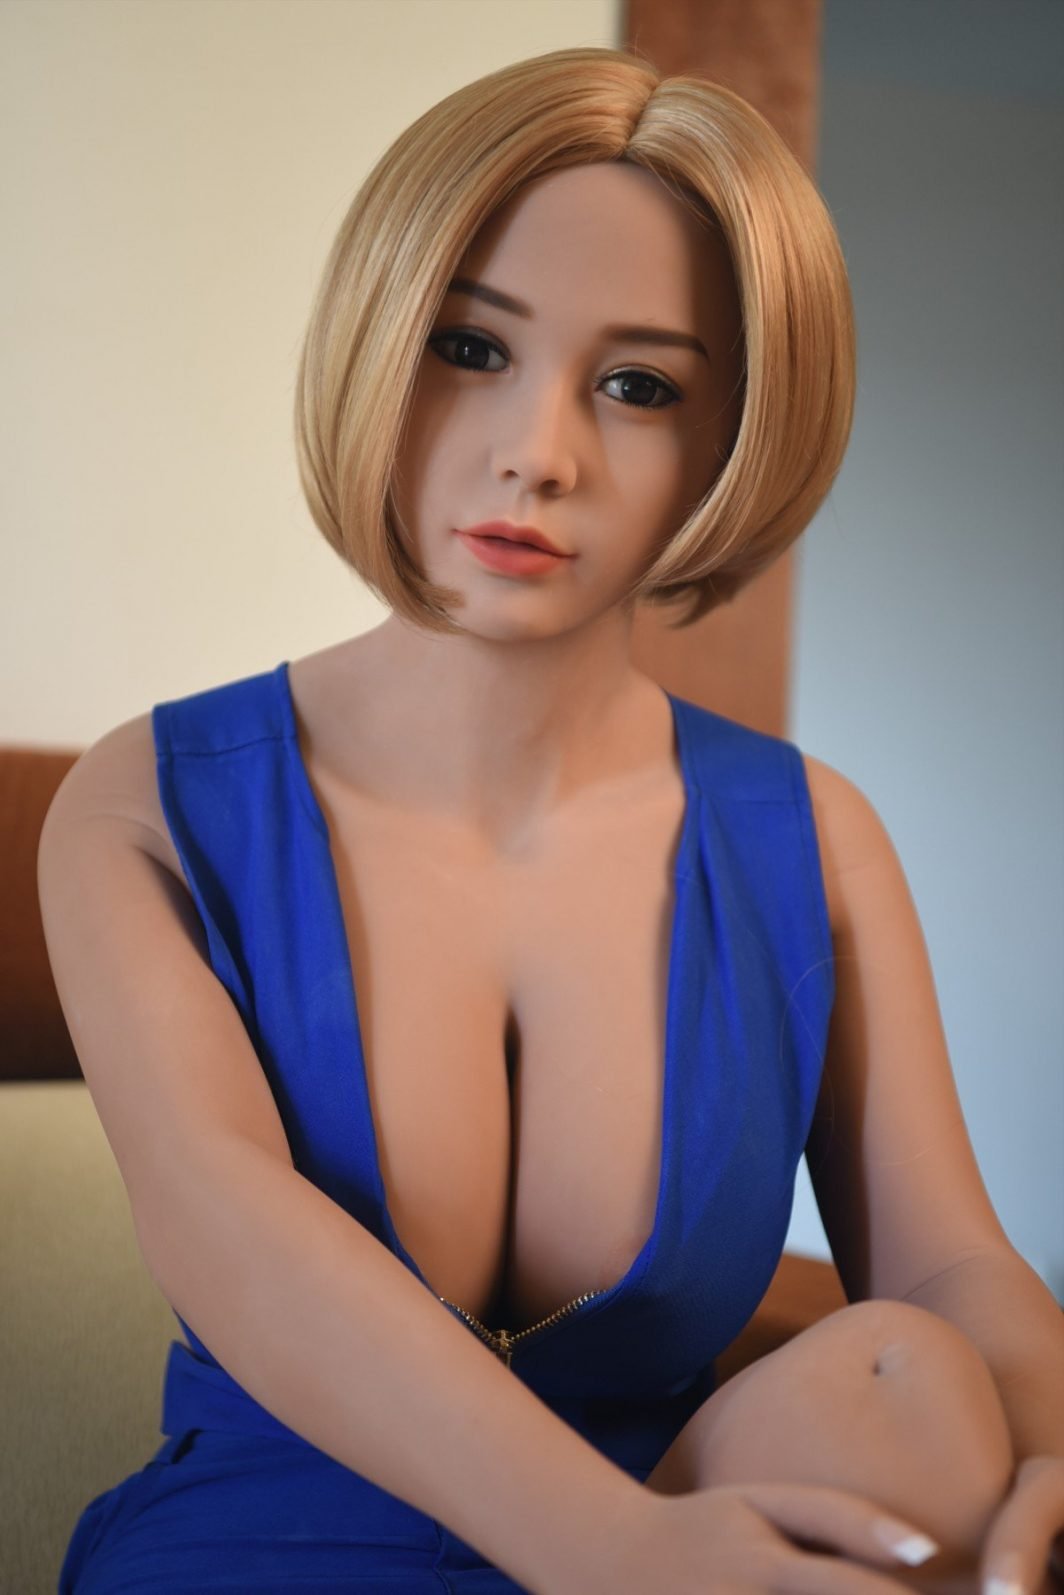 TPE Sex Doll Realistic Solid Adult Toy - Bairn